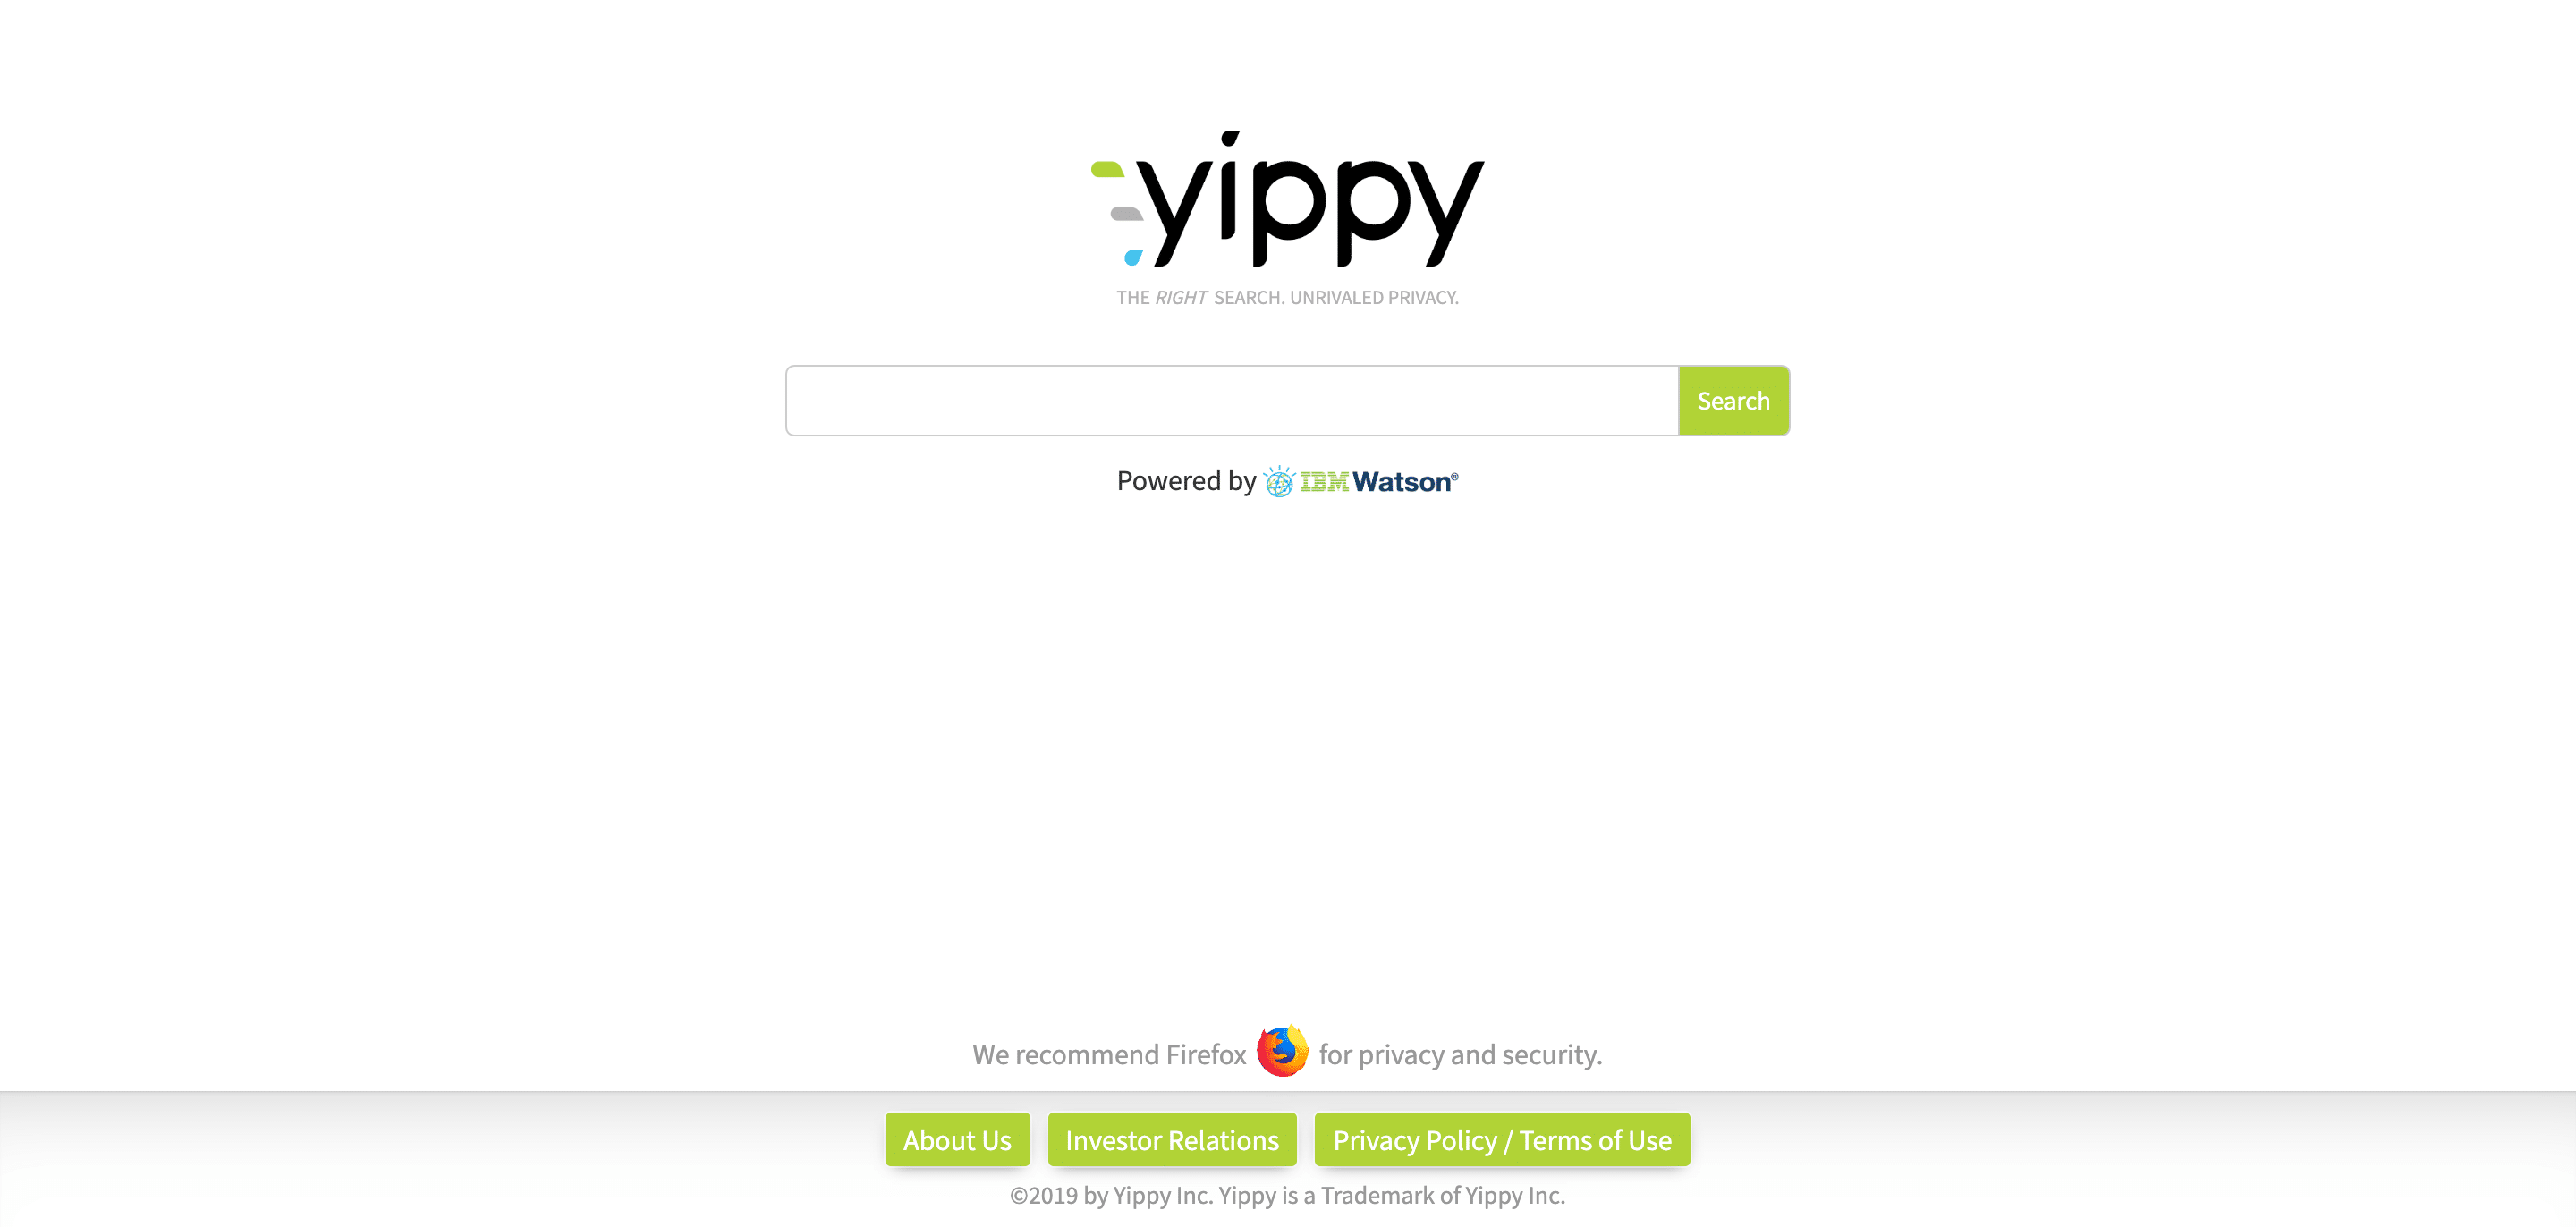 yippy-search-engine